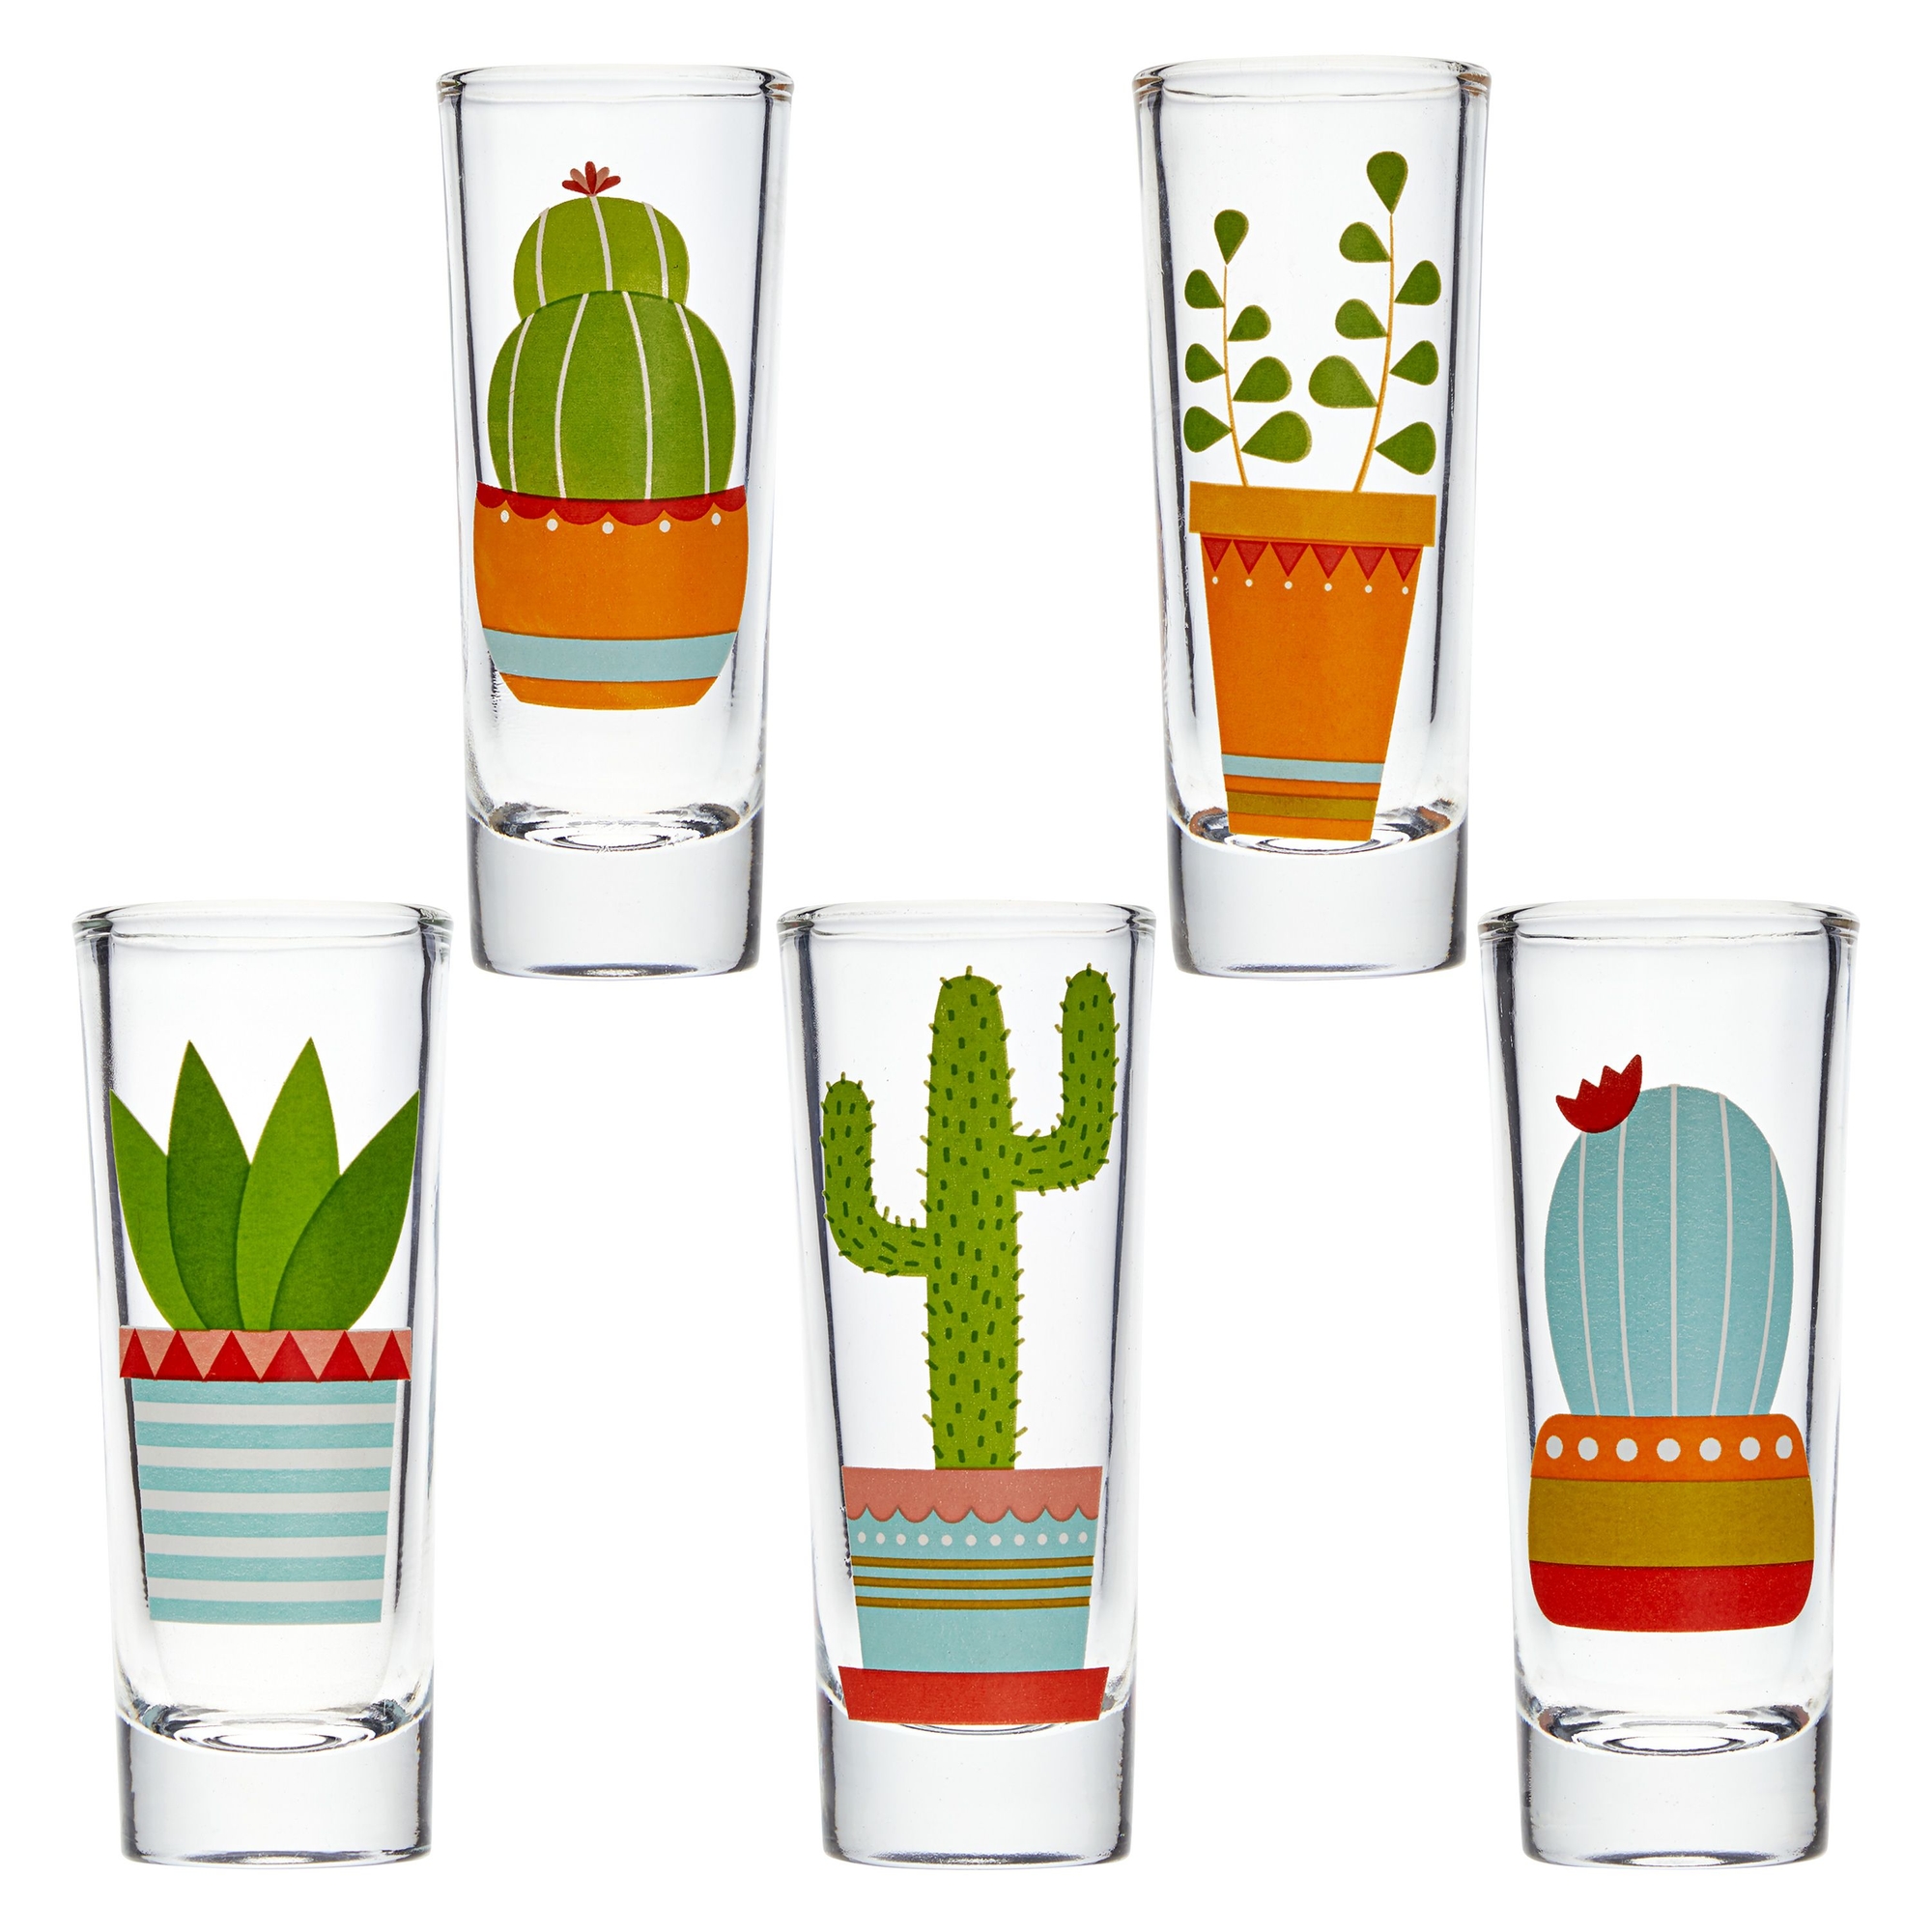 5 Pack Shot Glasses Set with Cactus Designs for Bachelorette, Fiesta Supplies, Western-Themed Party, Round, Decorative Shot Glasses with Heavy Base for Tequila, Whiskey, Vodka (2 oz) - image 1 of 10